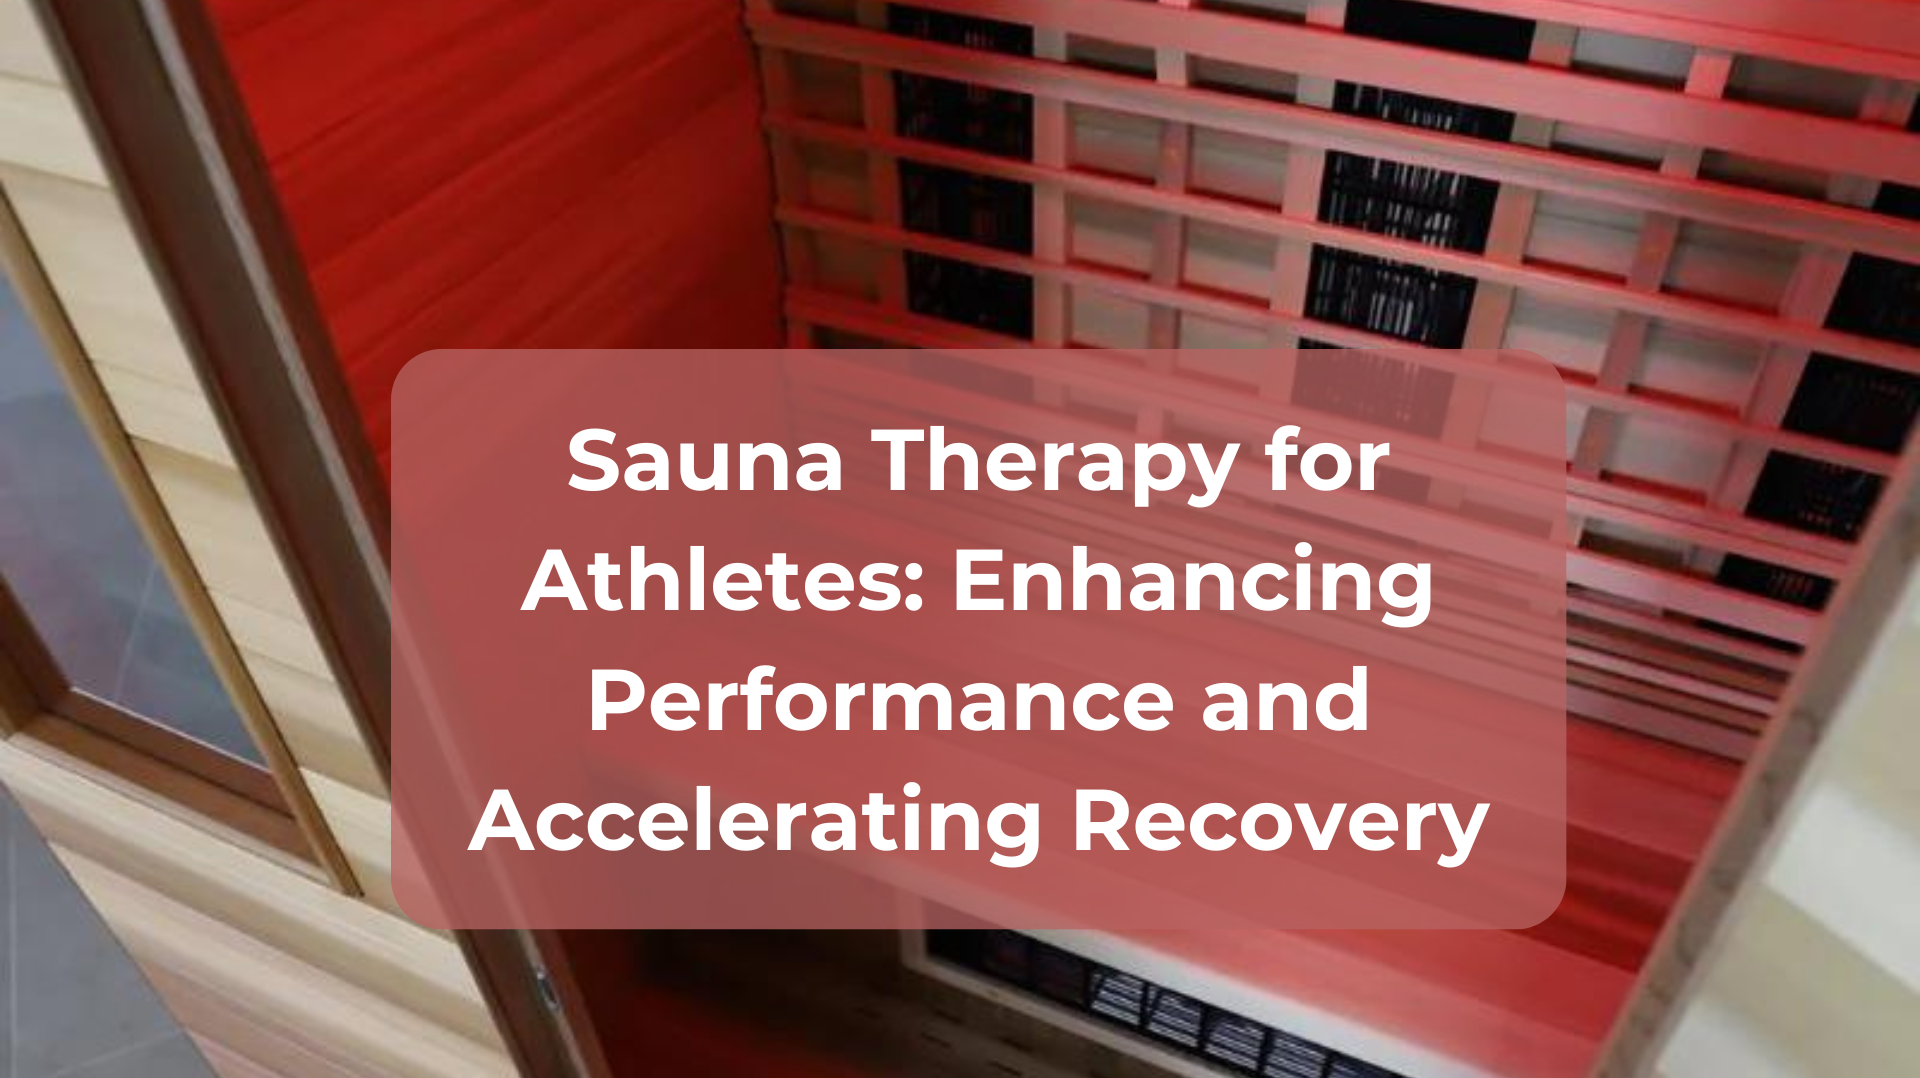 Sauna Therapy for Athletes: Enhancing Performance and Accelerating Recovery